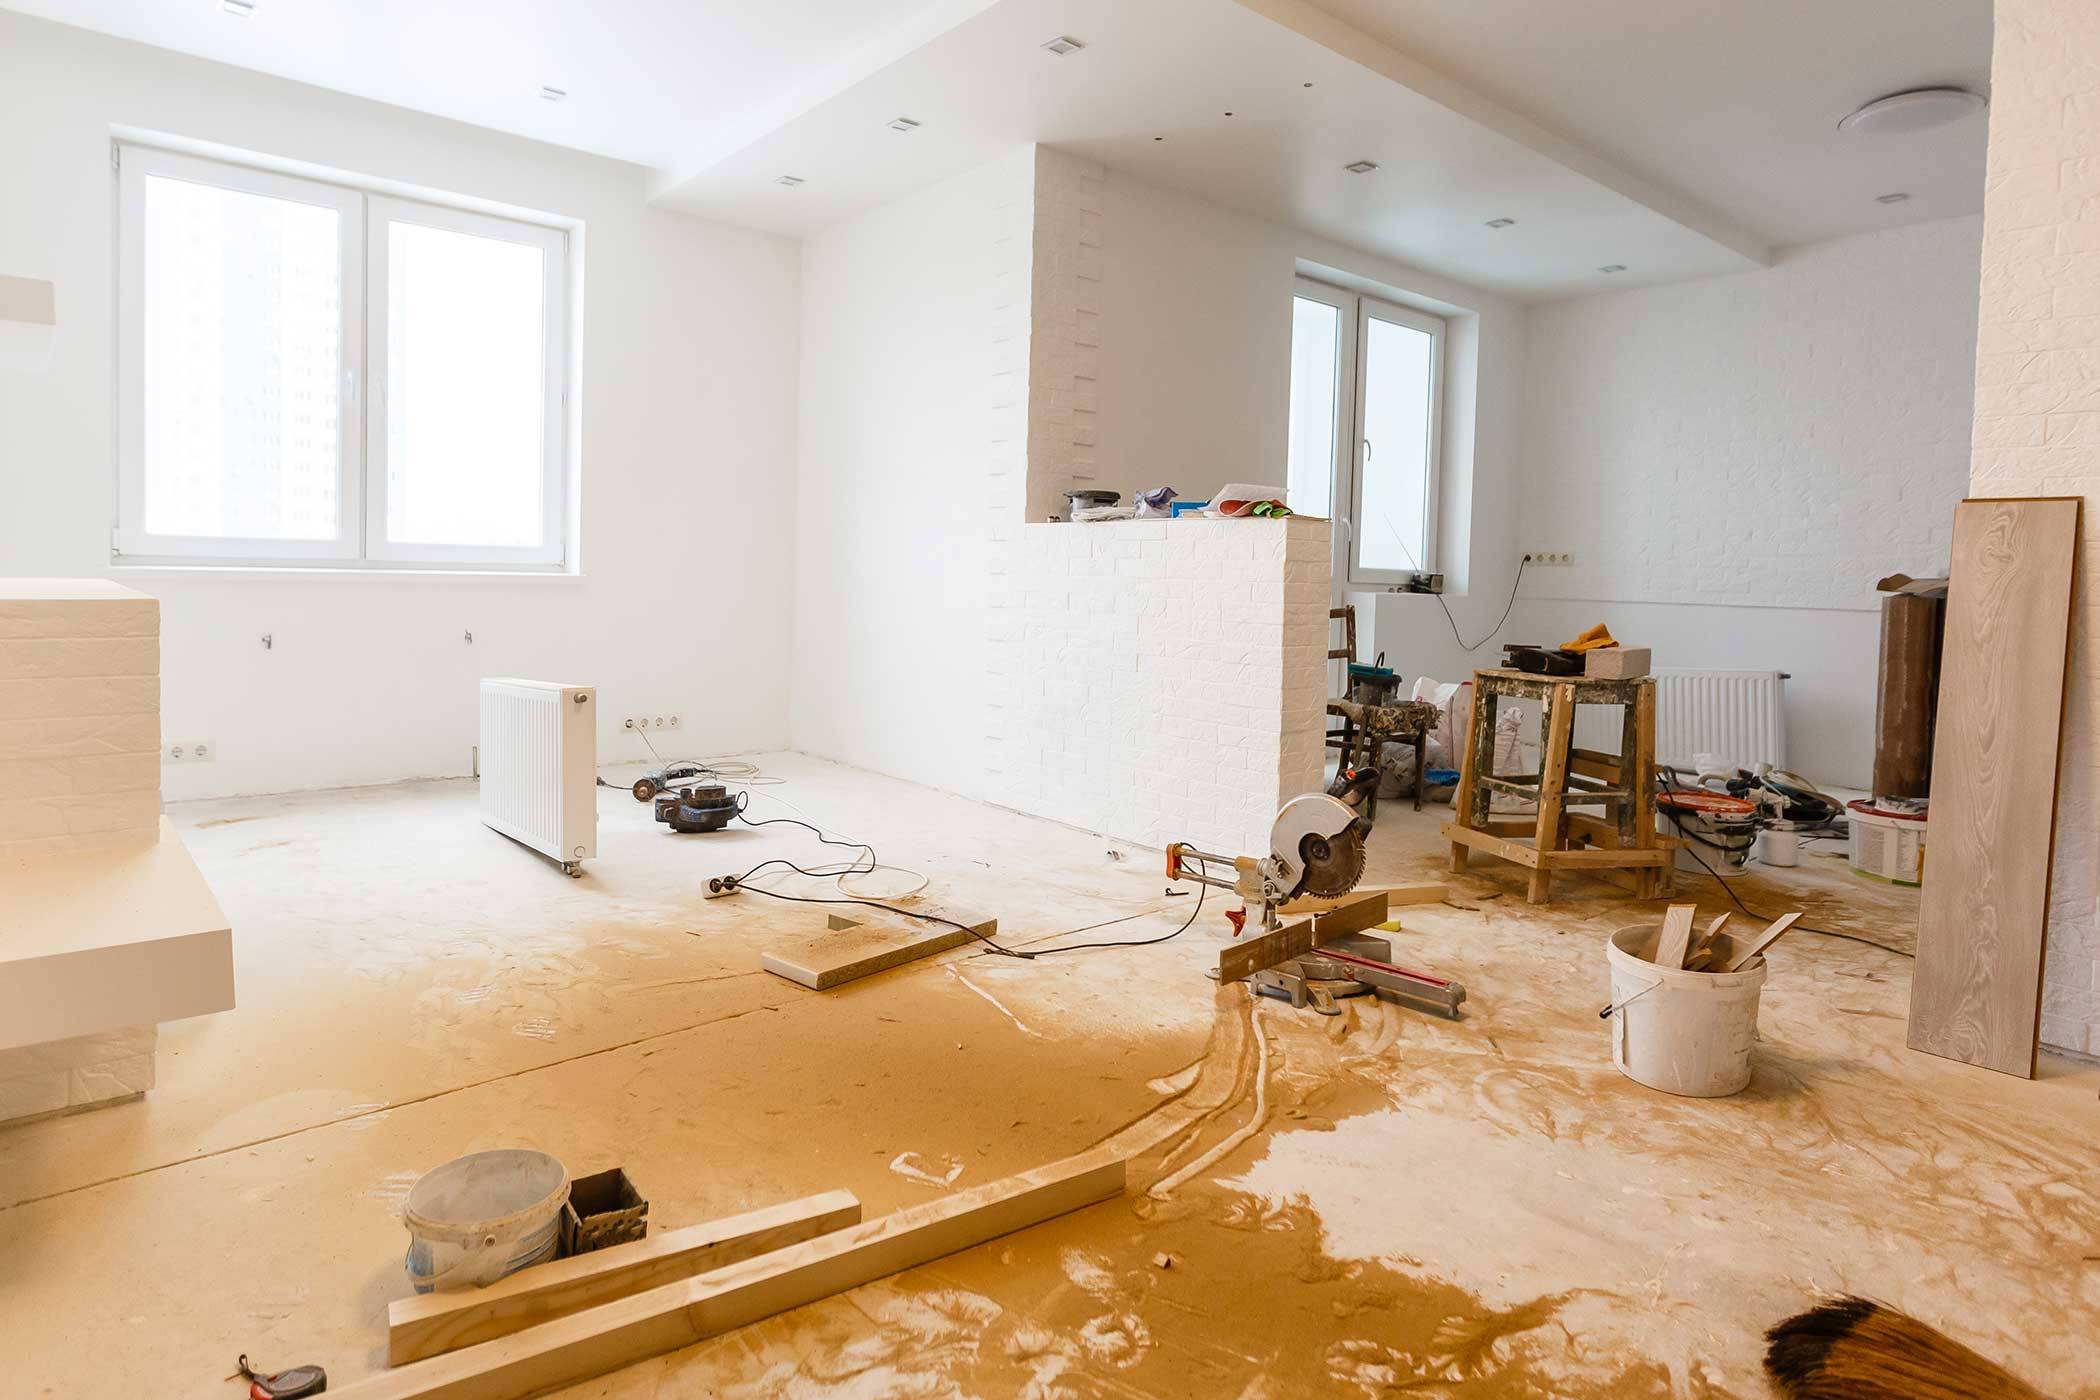 How To Start A Home Renovation Business